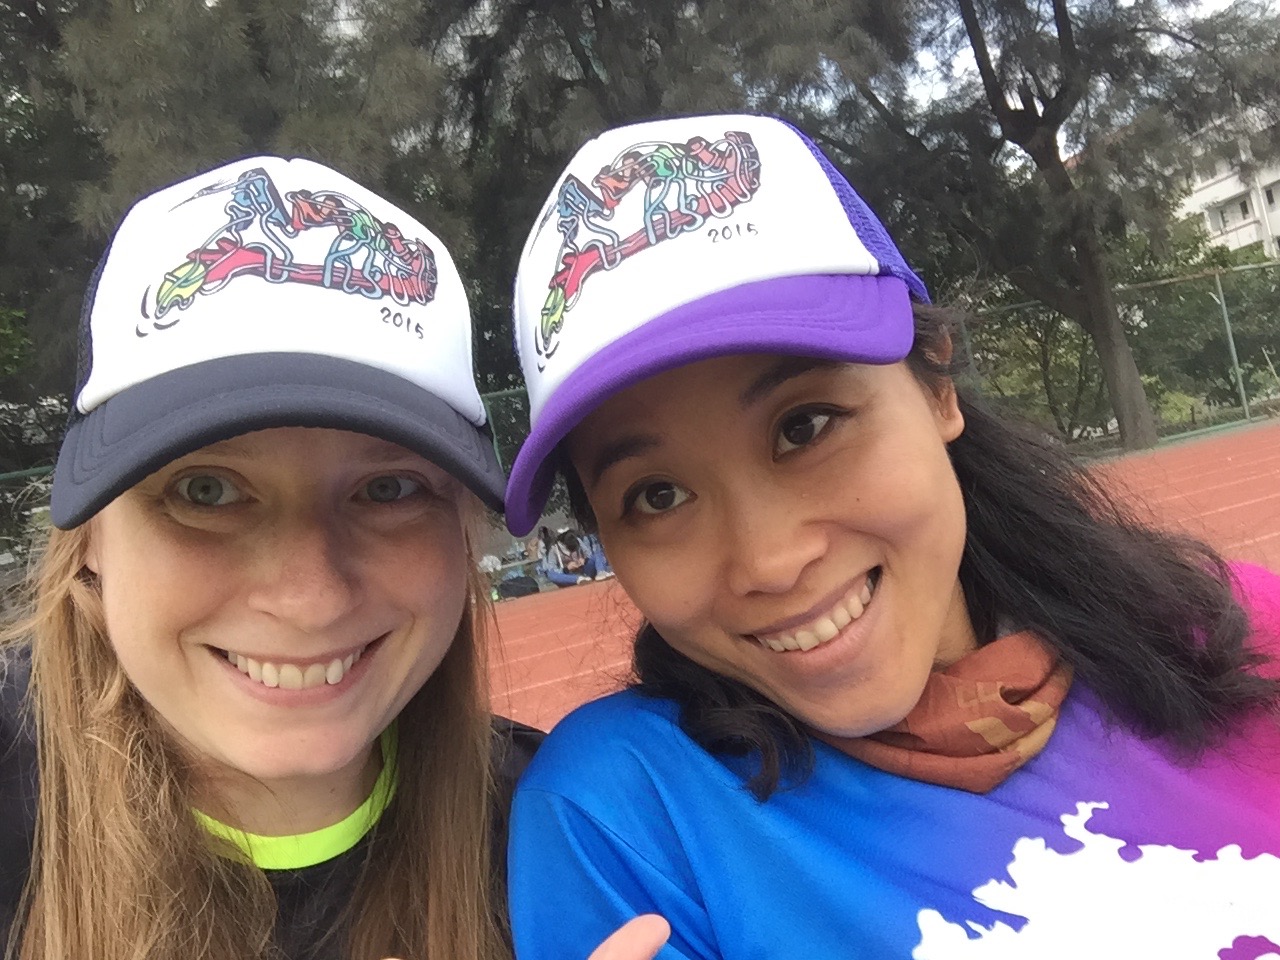 Me and Shulei, the female MVP, wearing our awards. It's a hat designed by one of the player. It says "Amoy" which is the old name of Xiamen, and has a hand throwing a frisbee. Stylish and functional is the Bailu way.